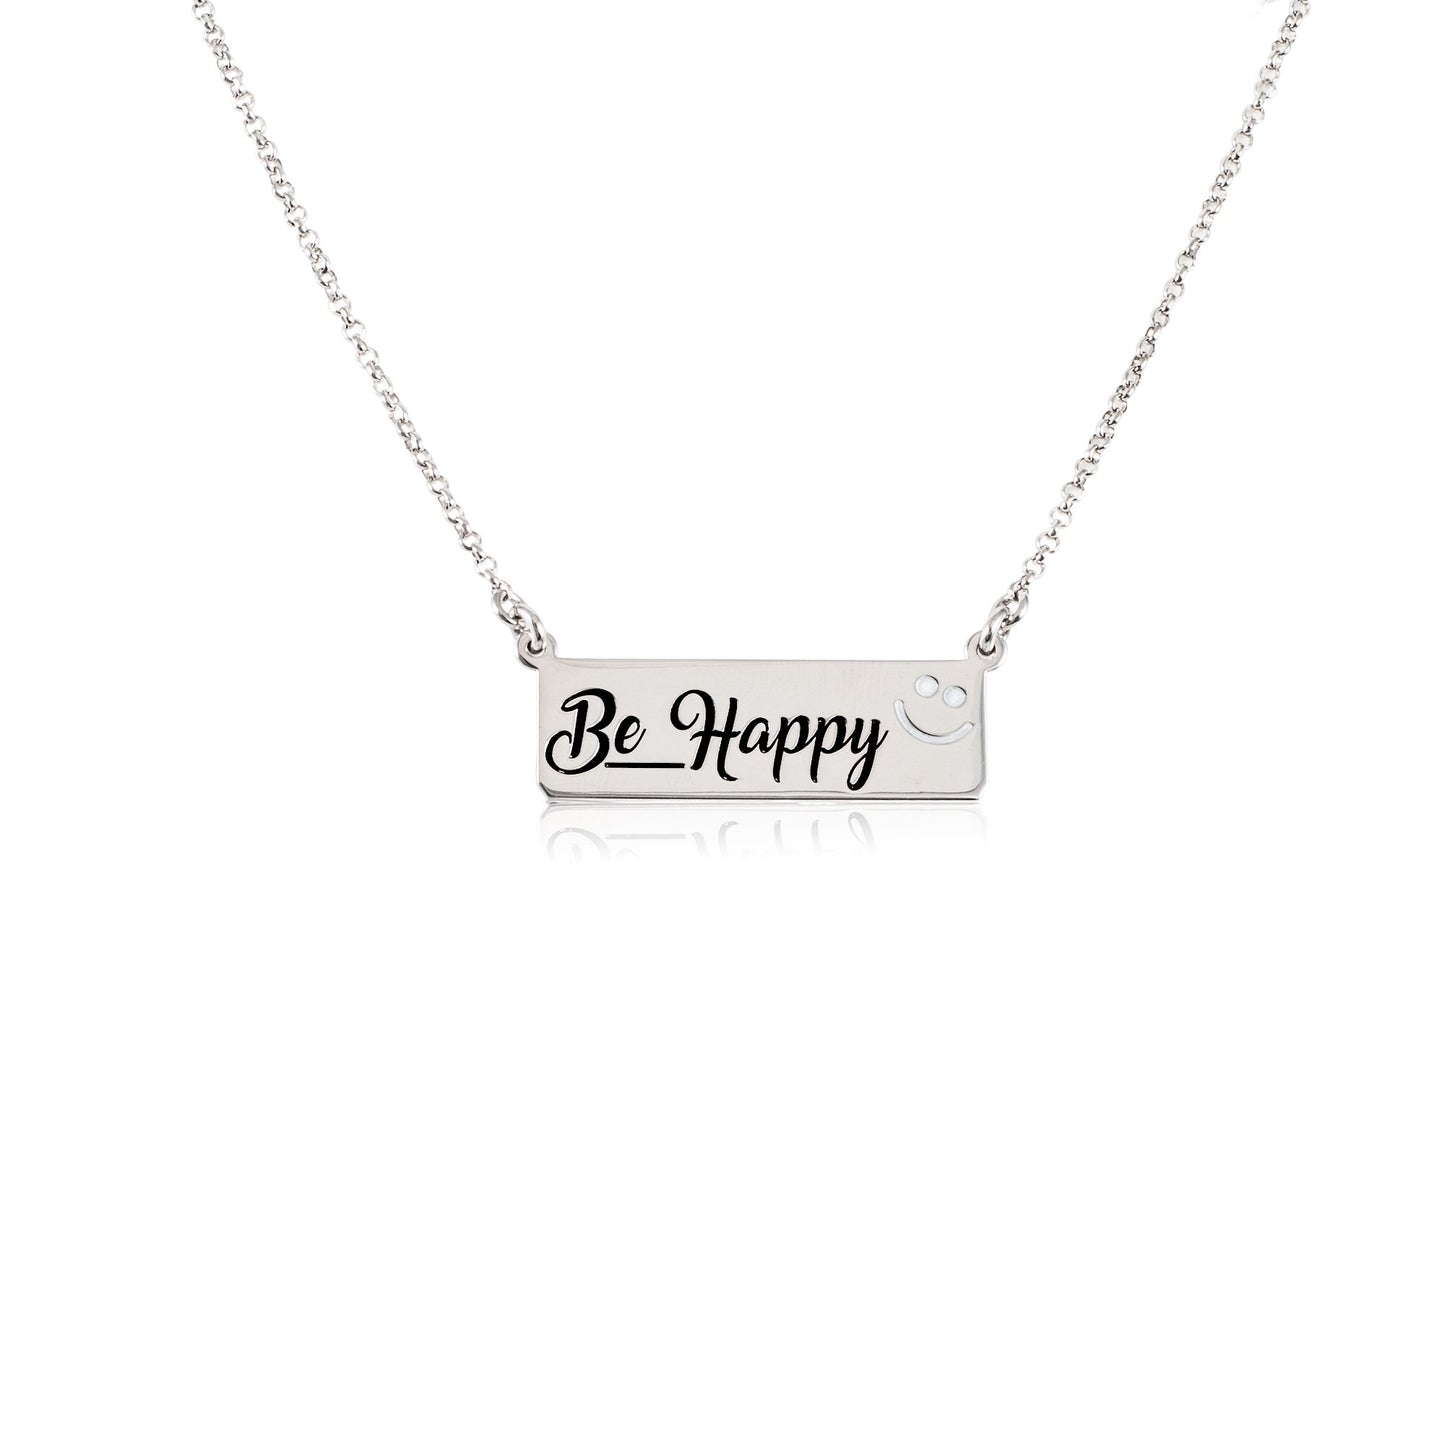 Be happy choker necklace